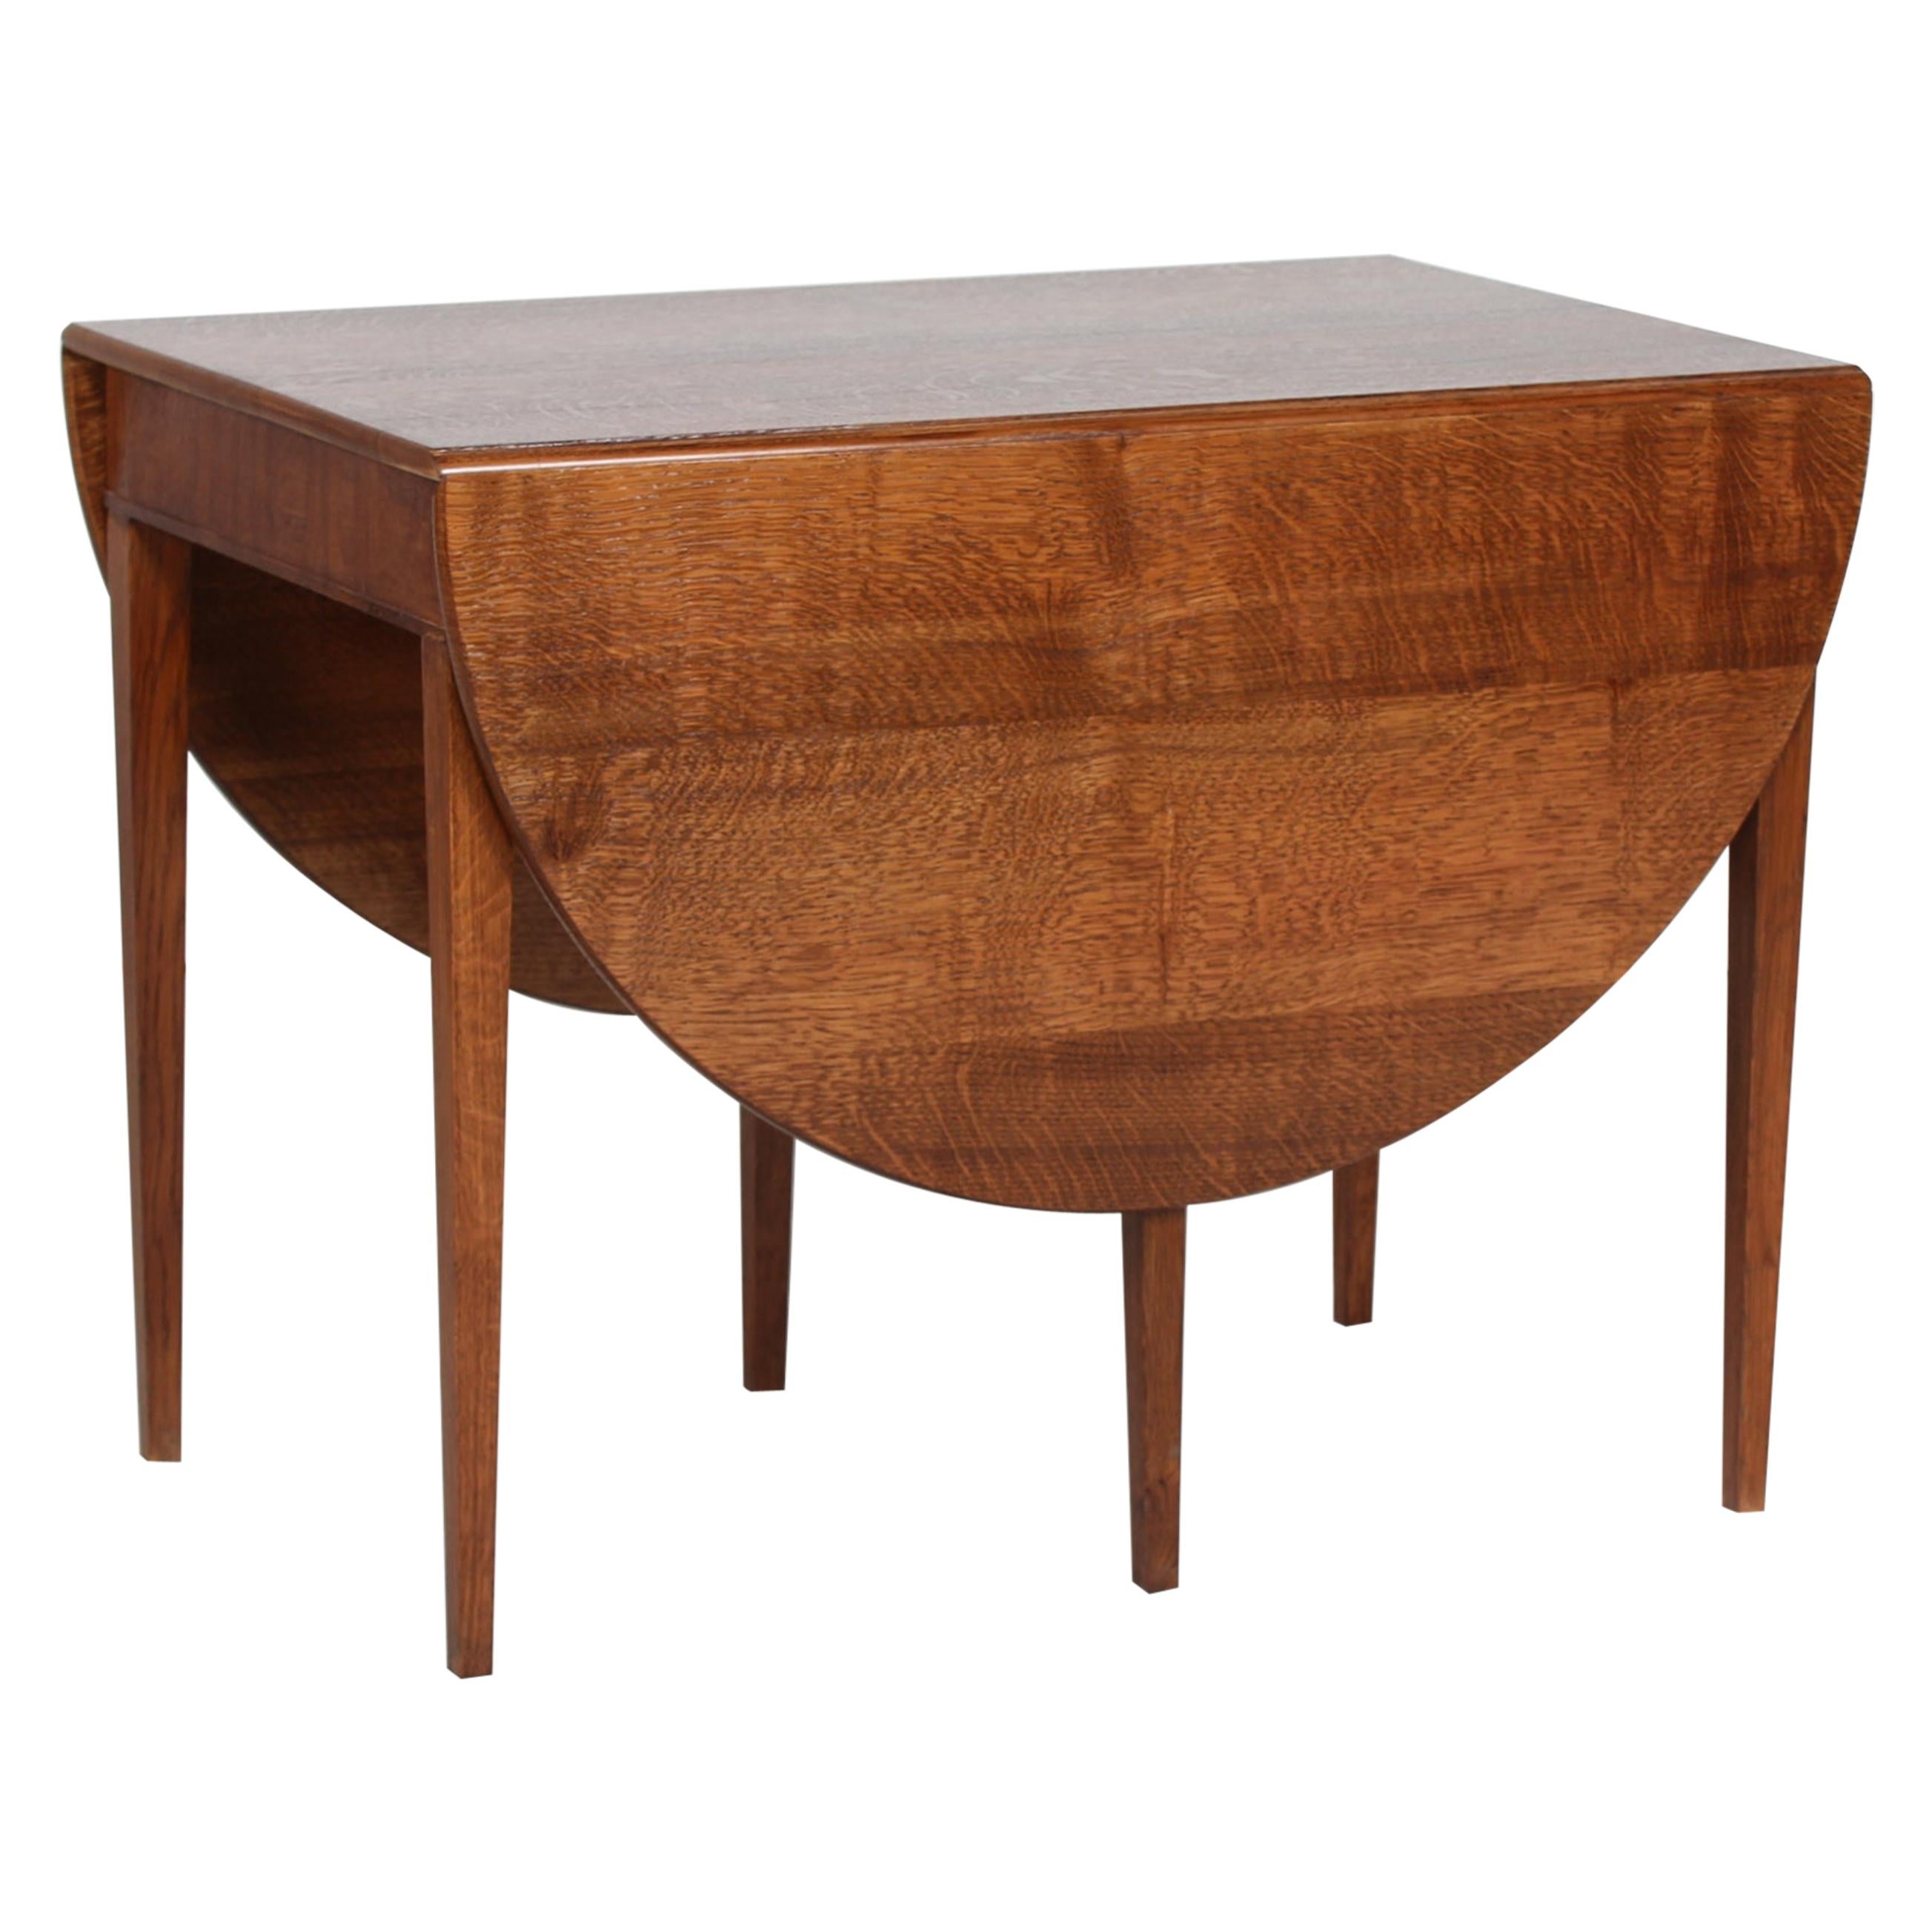 Danish Modern Frits Henningsen Coffee Table of Solid Oak with Two Flaps, 1950s